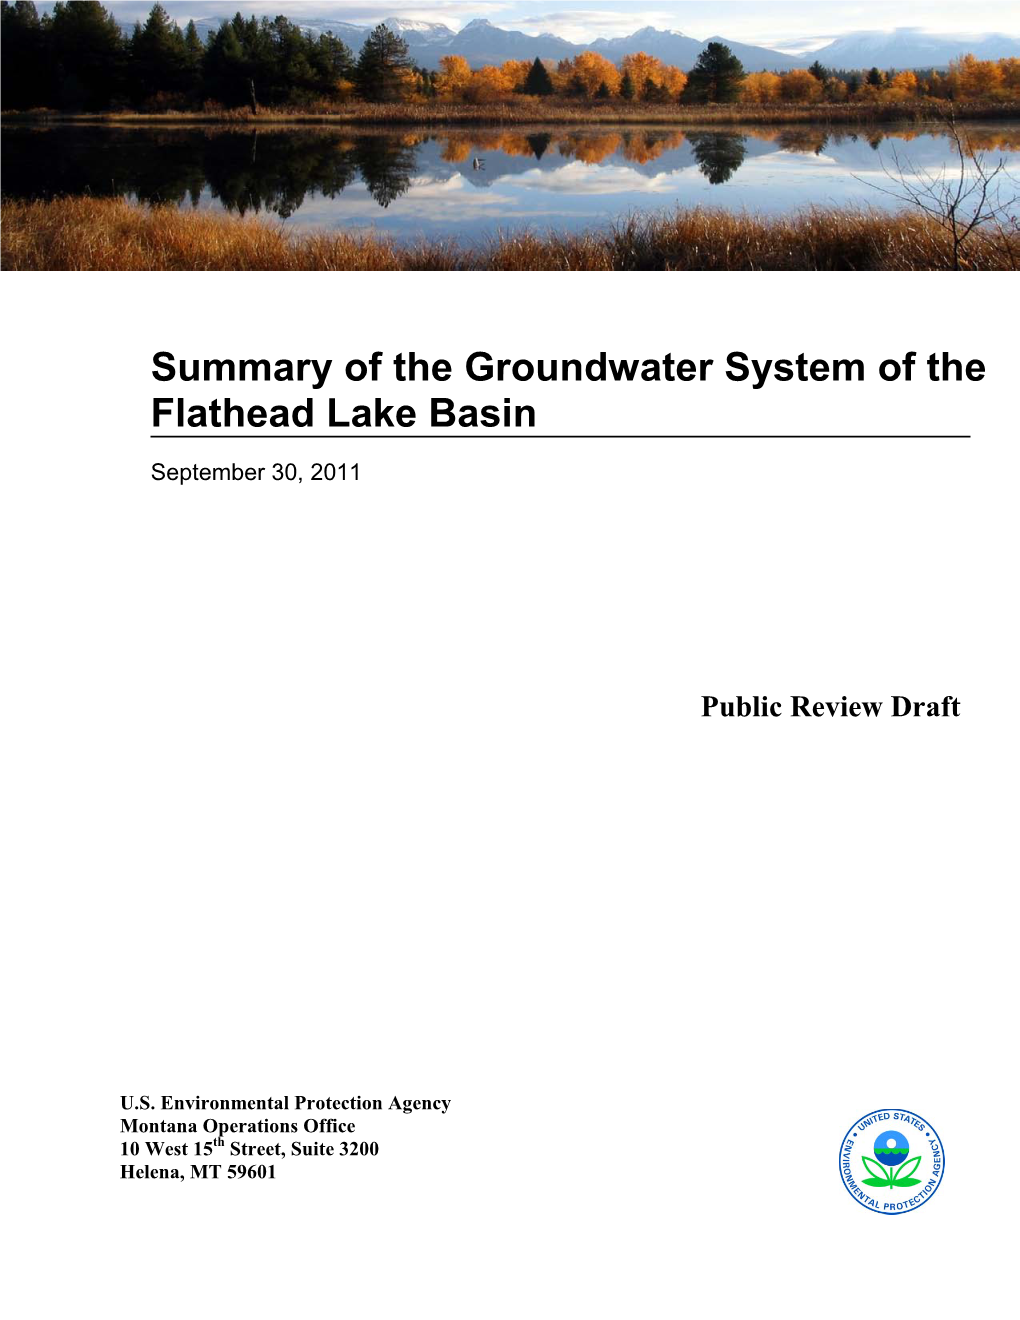 Summary of the Groundwater System of the Flathead Lake Basin